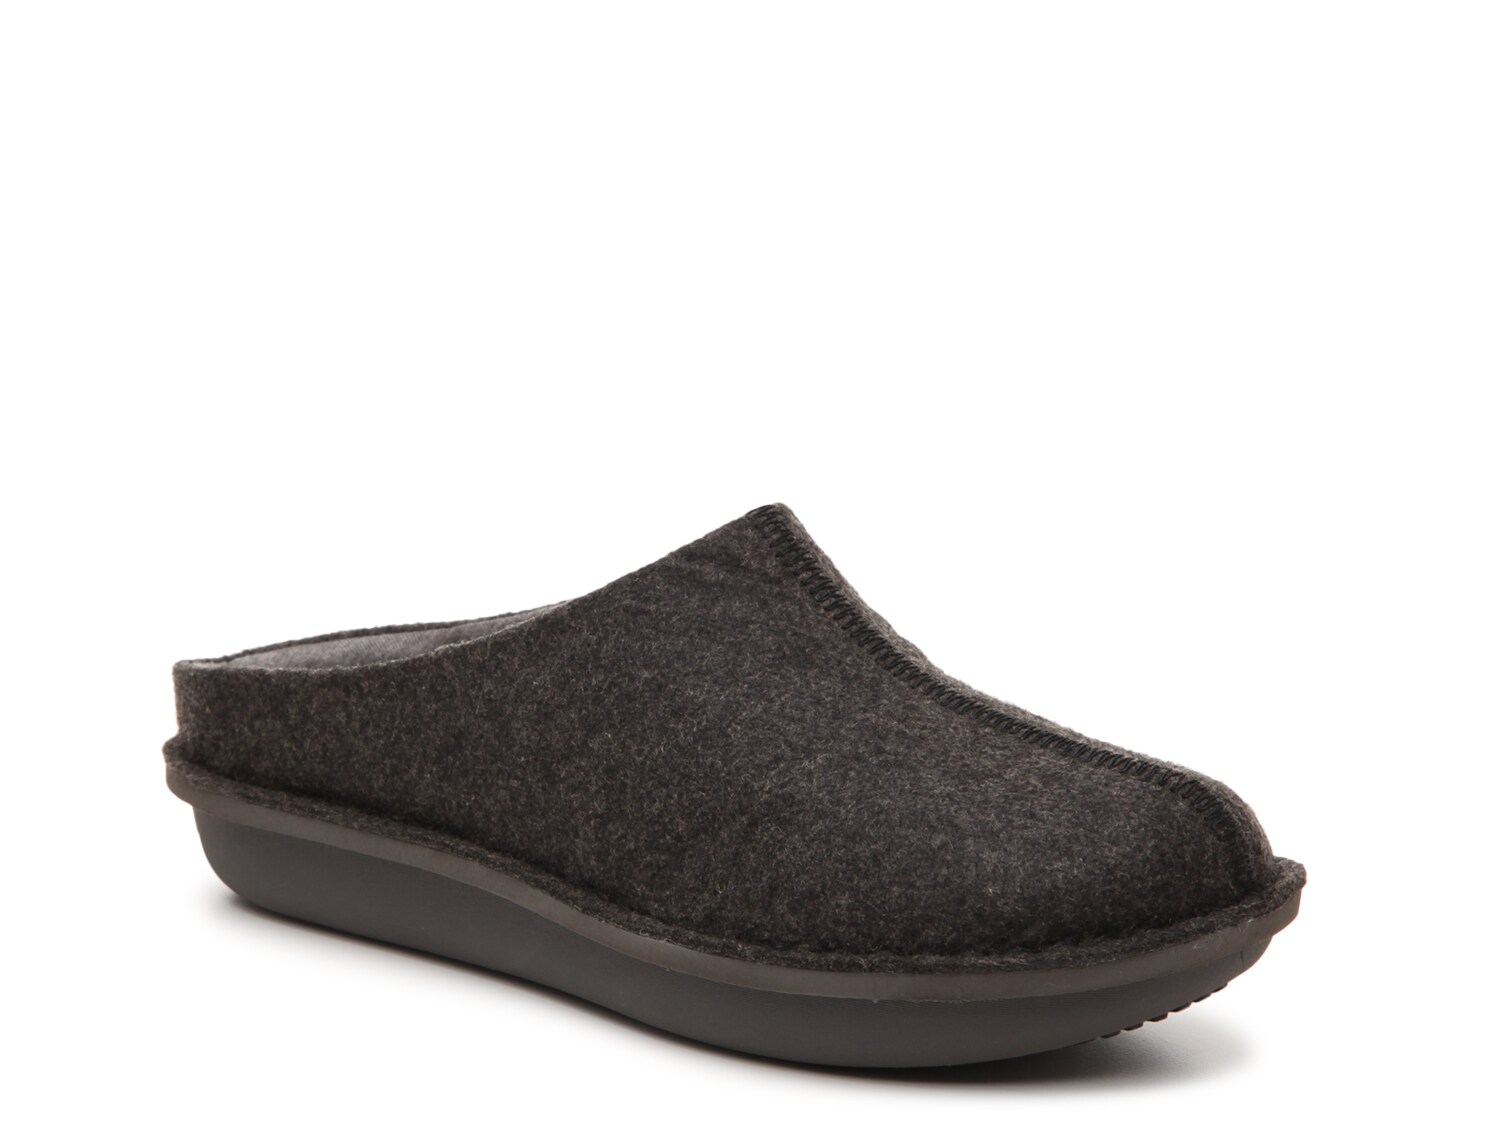 cloudsteppers by clarks slippers